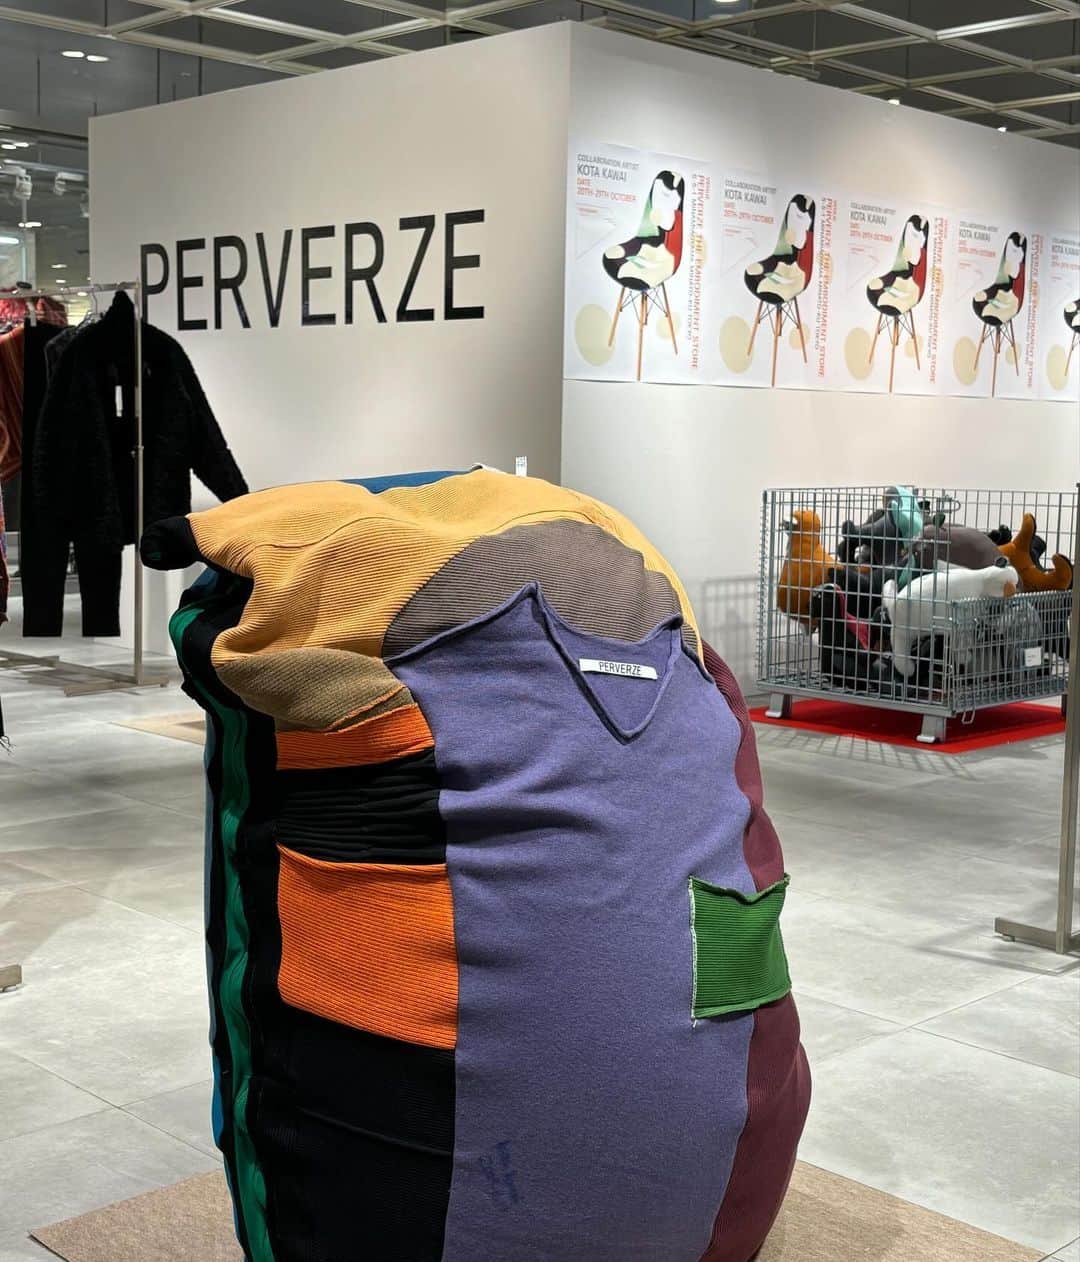 PERVERZE_OFFICIALのインスタグラム：「A exhibition of Tokyo-based brand & project "PERVERZE" is being held at Hankyu Umeda Department Store from November 1st to November 7th, 2023. This event will feature artworks presented at "DESIGNART TOKYO 2023", one of Japan's largest design & art festivals currently being held in Omotesando, Tokyo from October 20th to 29th, 2023. PERVERZE's latest Fall/Winter collection will also be on display. The artwork on display is a collaborative work created by up-and-coming artist KOTA KAWAI @_kotakawai using PERVERZE's archives.  During this period, customers who purchase 30,000 yen (tax included) or more will receive a limited edition gift. (Supplies very limited.)  2023年11月1日(水)〜11月7日(火)の期間、阪急うめだ百貨店にて東京発ブランド＆プロジェクト「PERVERZE」の特別展を開催しております。  本イベントでは、2023年10月20日(金)〜29日(日)の期間に東京・表参道を中心に開催中の日本最大級のデザイン&アートフェスティバル「DESIGNART TOKYO 2023」にて発表されたアート作品を展示する他、PERVERZEの最新秋冬コレクションもご覧いただけます。 展示するアート作品は、気鋭のアーティスト「KOTA KAWAI」がPERVERZEのアーカイブを使用し制作したコラボレーション作品となっています。  期間中、30,000円（税込）以上ご購入のお客様に限定ノベルティをプレゼントいたします。（無くなり次第終了となります。）  Space direction by @formula_sds   【STORE INFORMATION】 阪急うめだ本店 3階 / コトコトステージ 31 ADDRESS: 大阪府大阪市北区角田町8-7 TEL: 06-6361-1381 TIME: 10:00〜20:00  #PERVERZE #AW23」